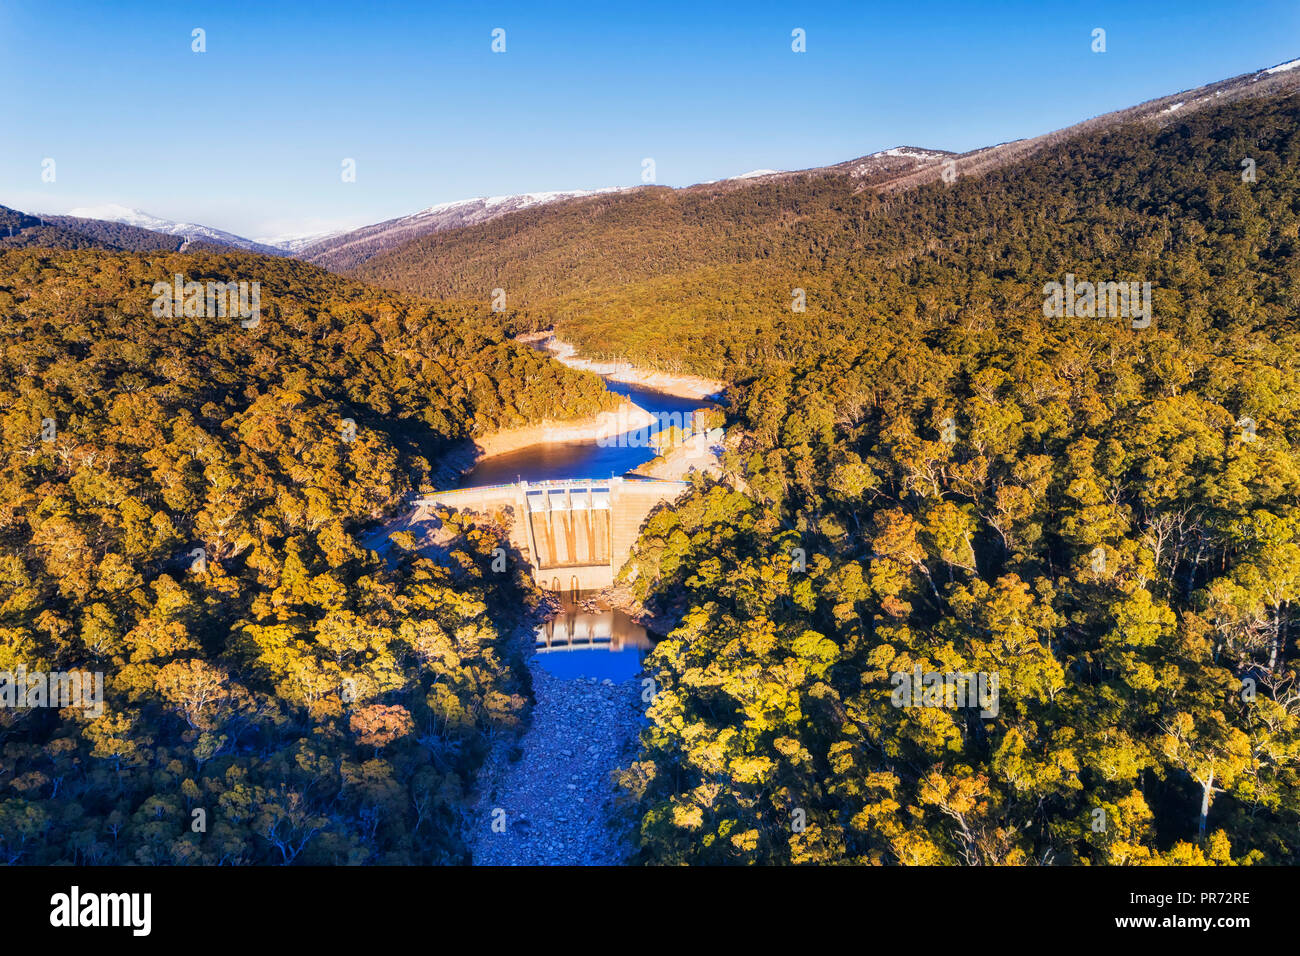 Massive concrete Guthega dam on Snowy river blocking flow and forming fresh water reservoir and generating renewable energy in Snowy mountains between Stock Photo